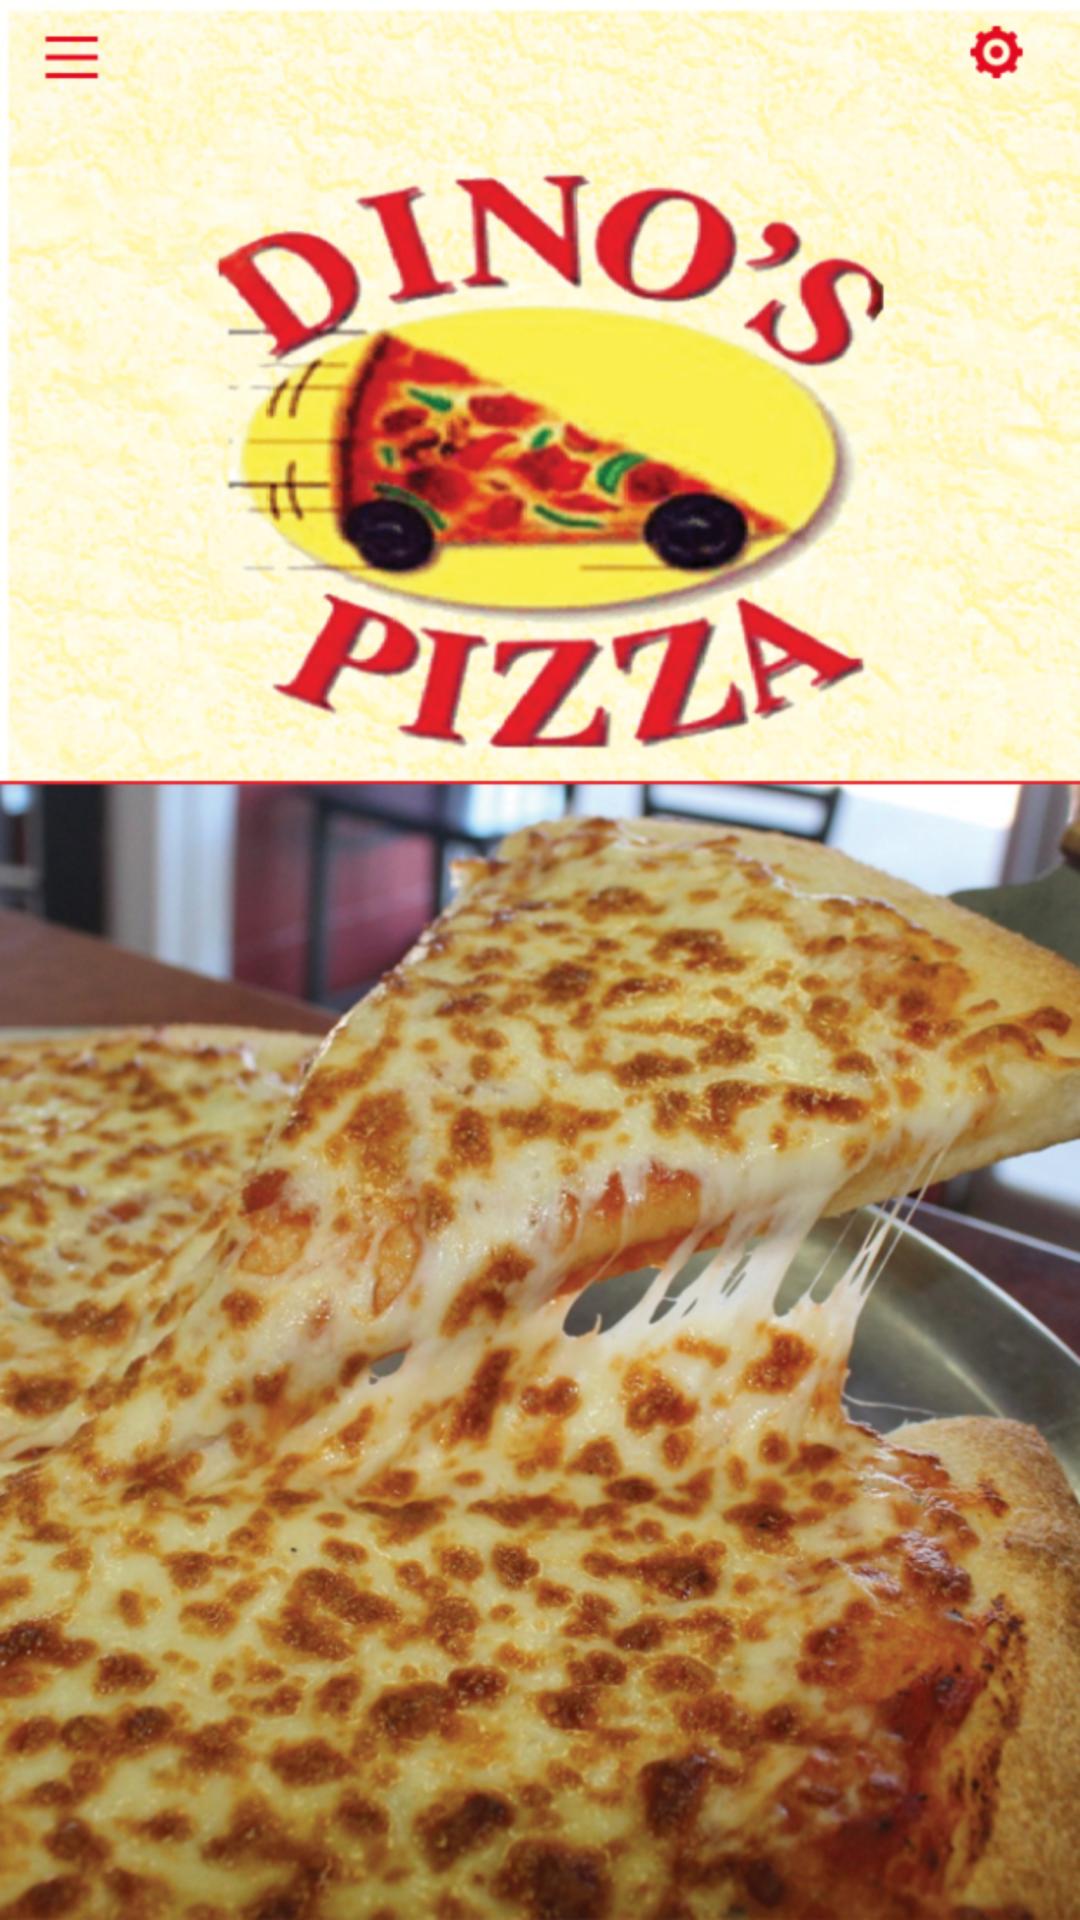 Dino's Pizza Charlottetown for Android - APK Download